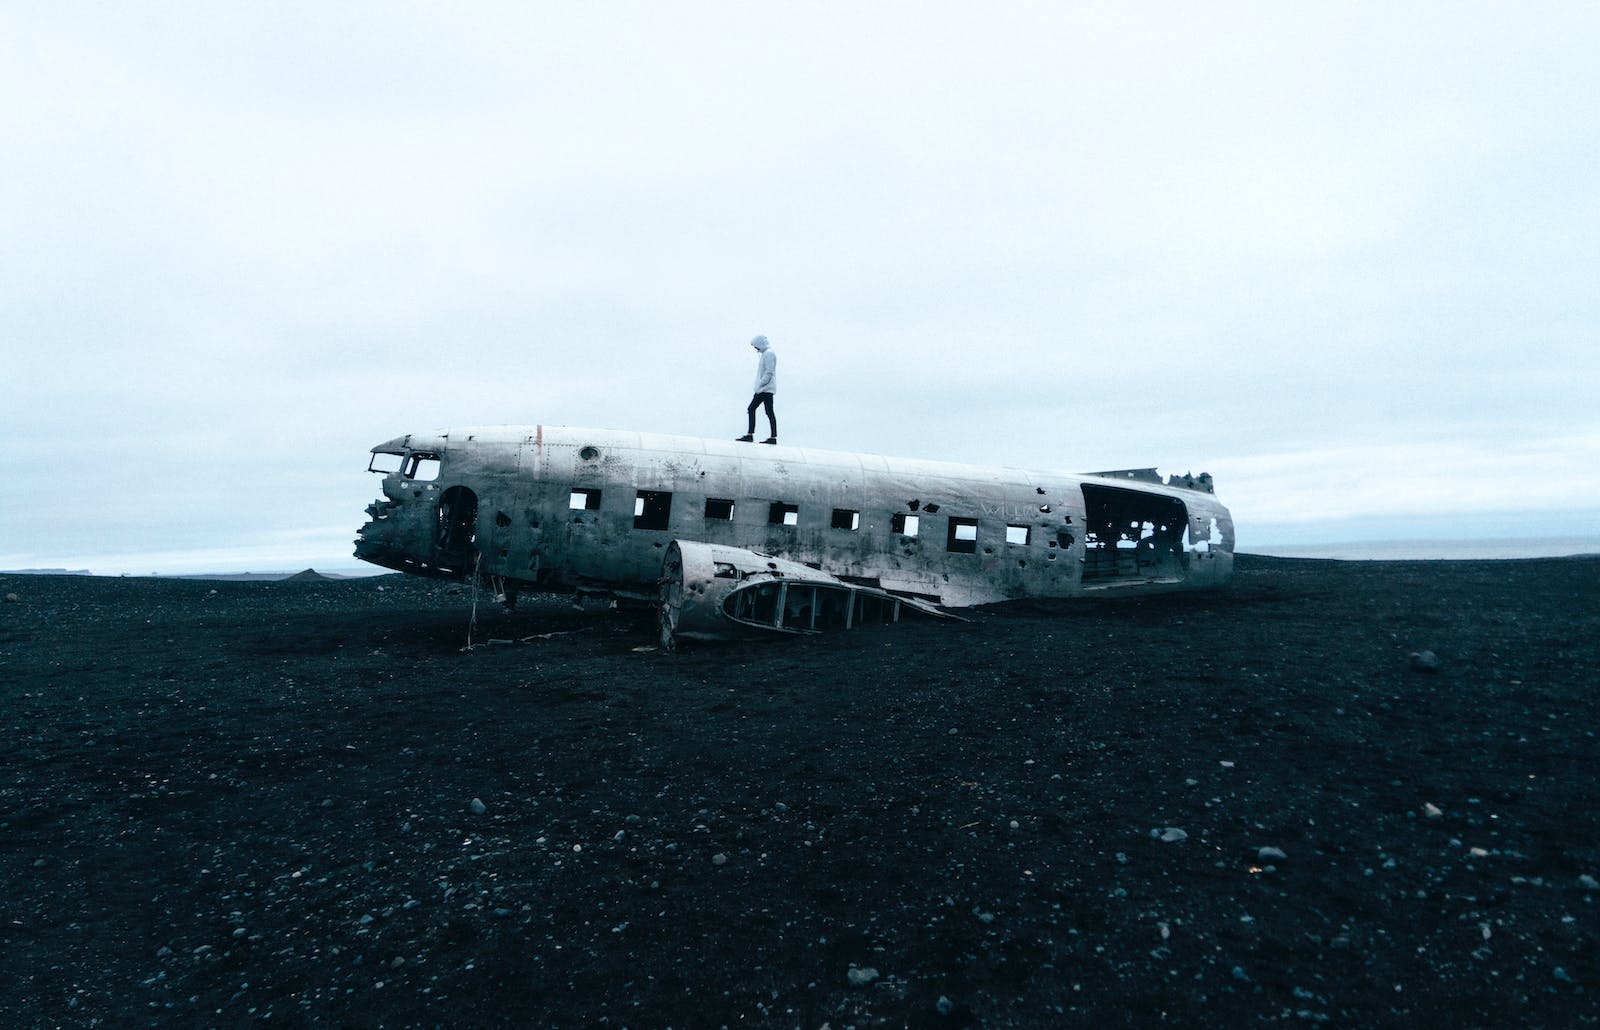 Person Standing on Wrecked Plane